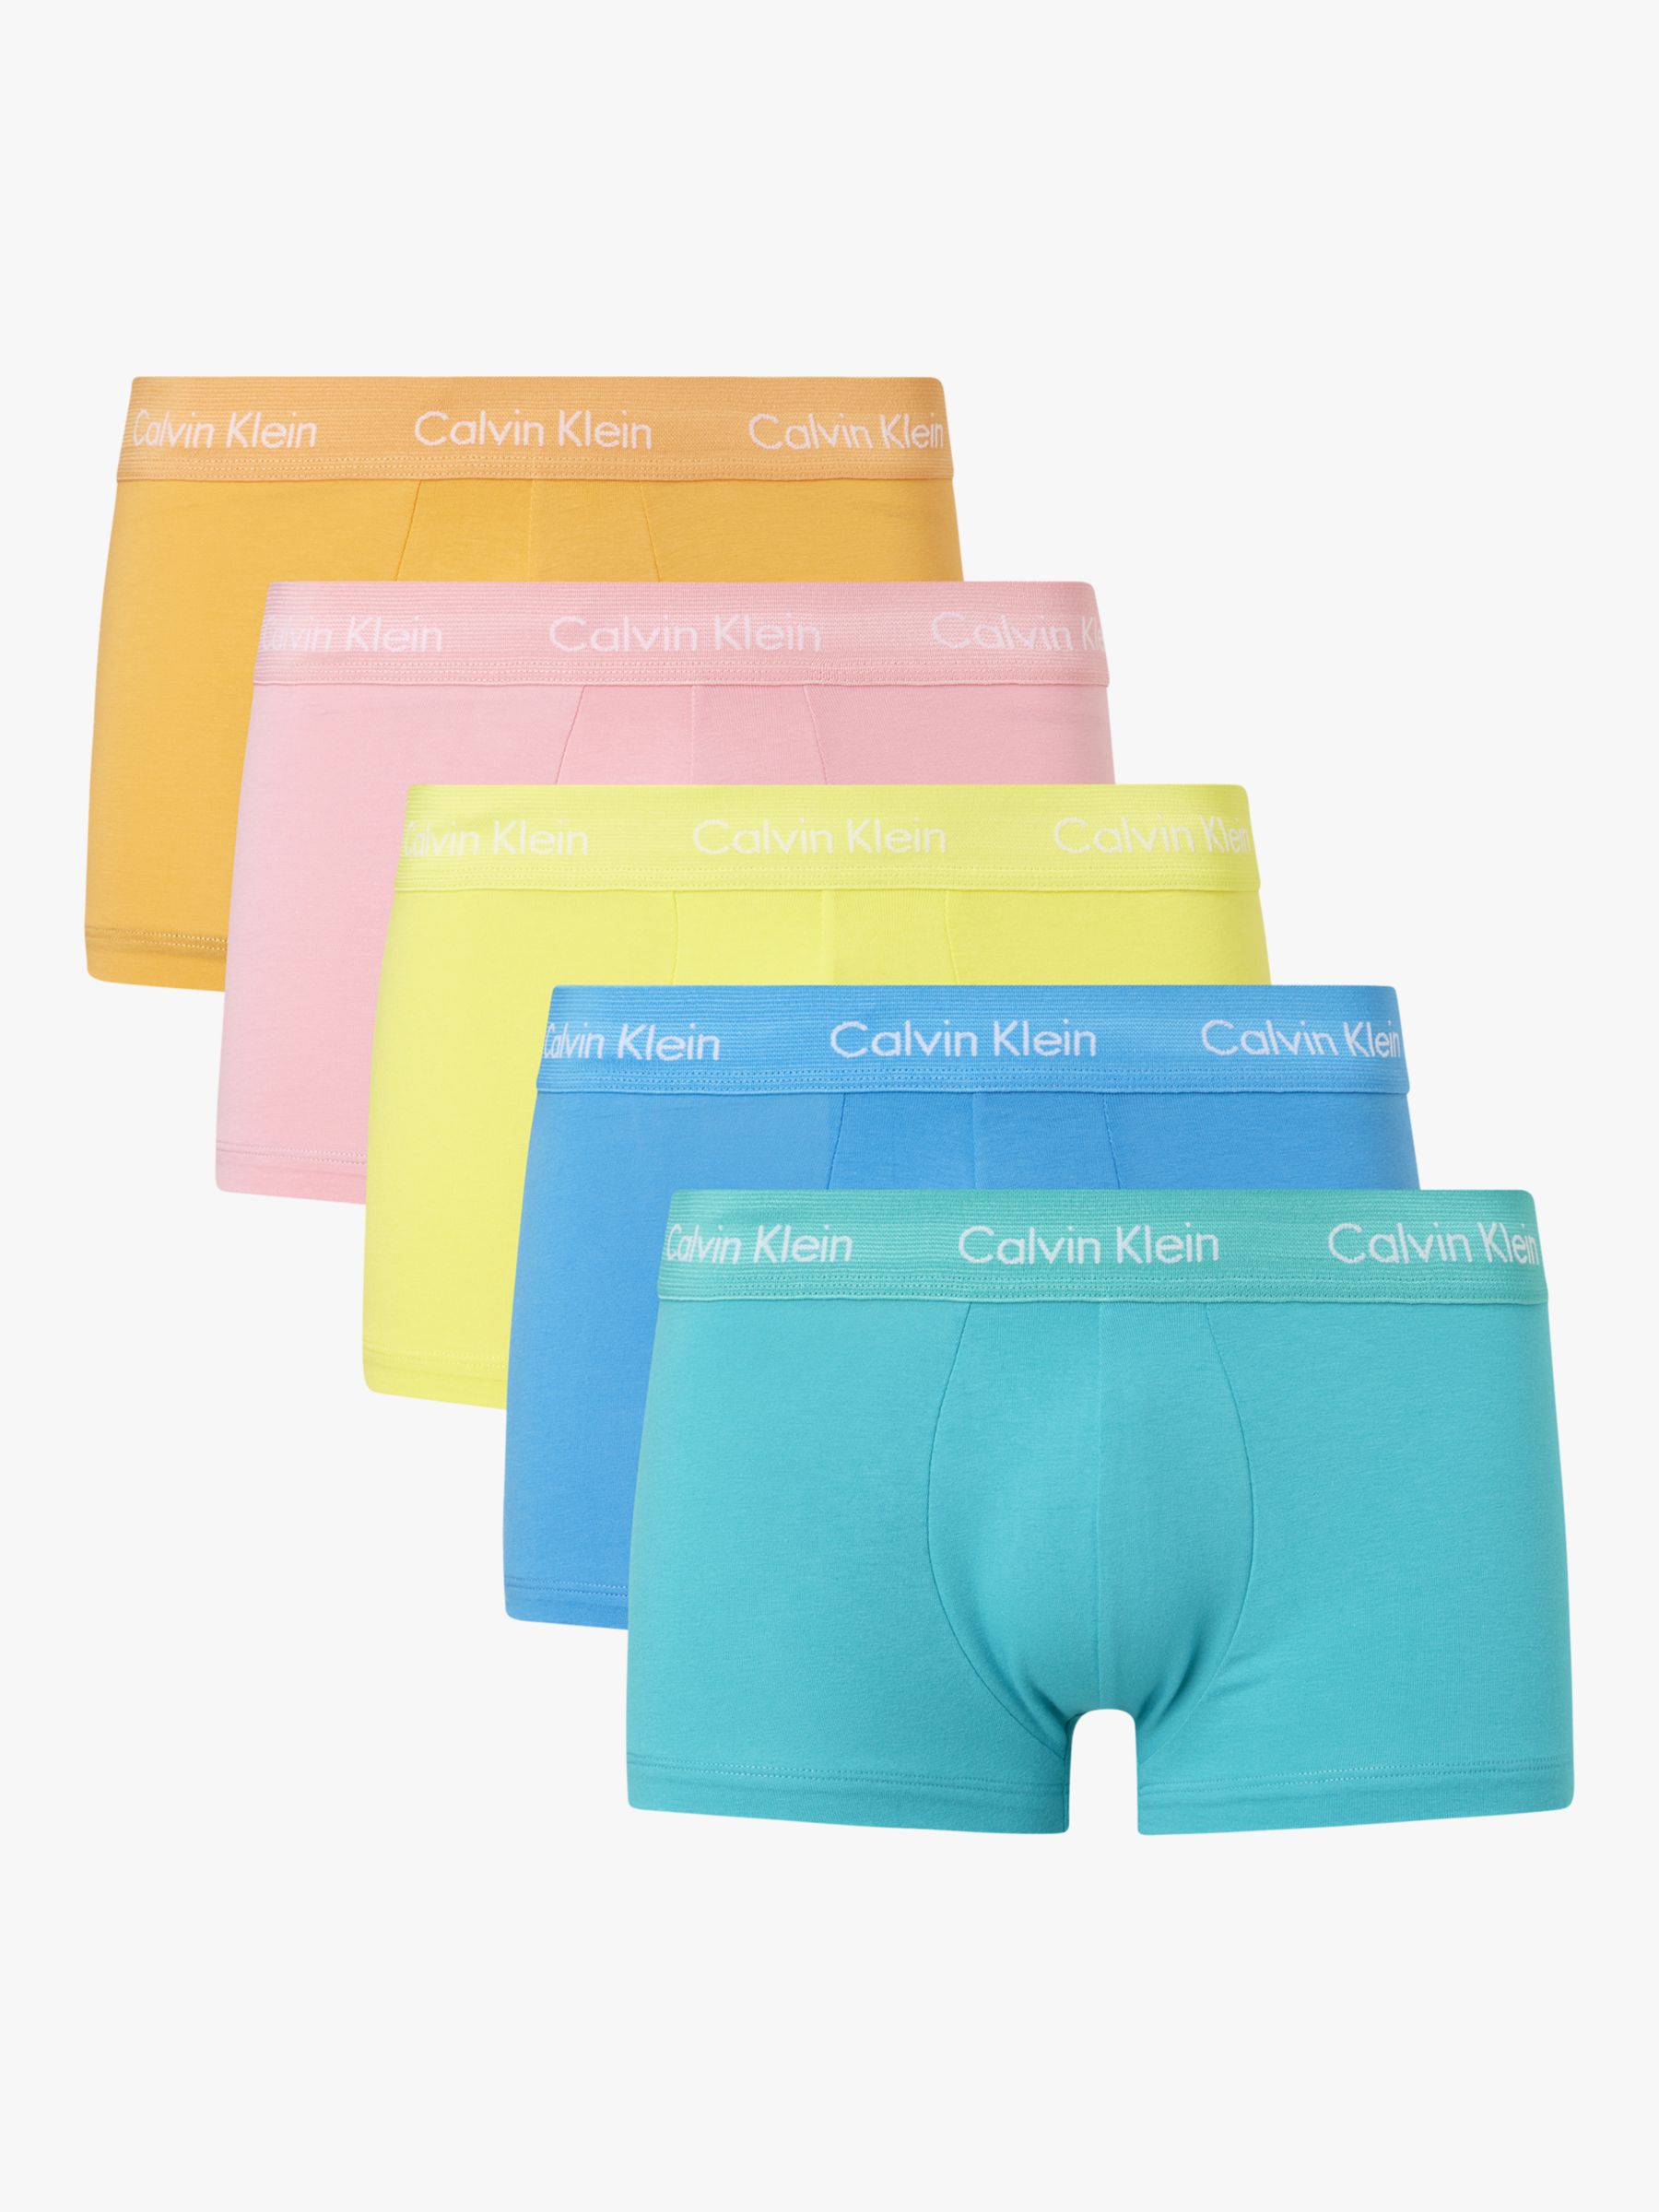 Calvin Klein The Pride Edit Low Rise Cotton Stretch Trunks, Pack of 5 ...